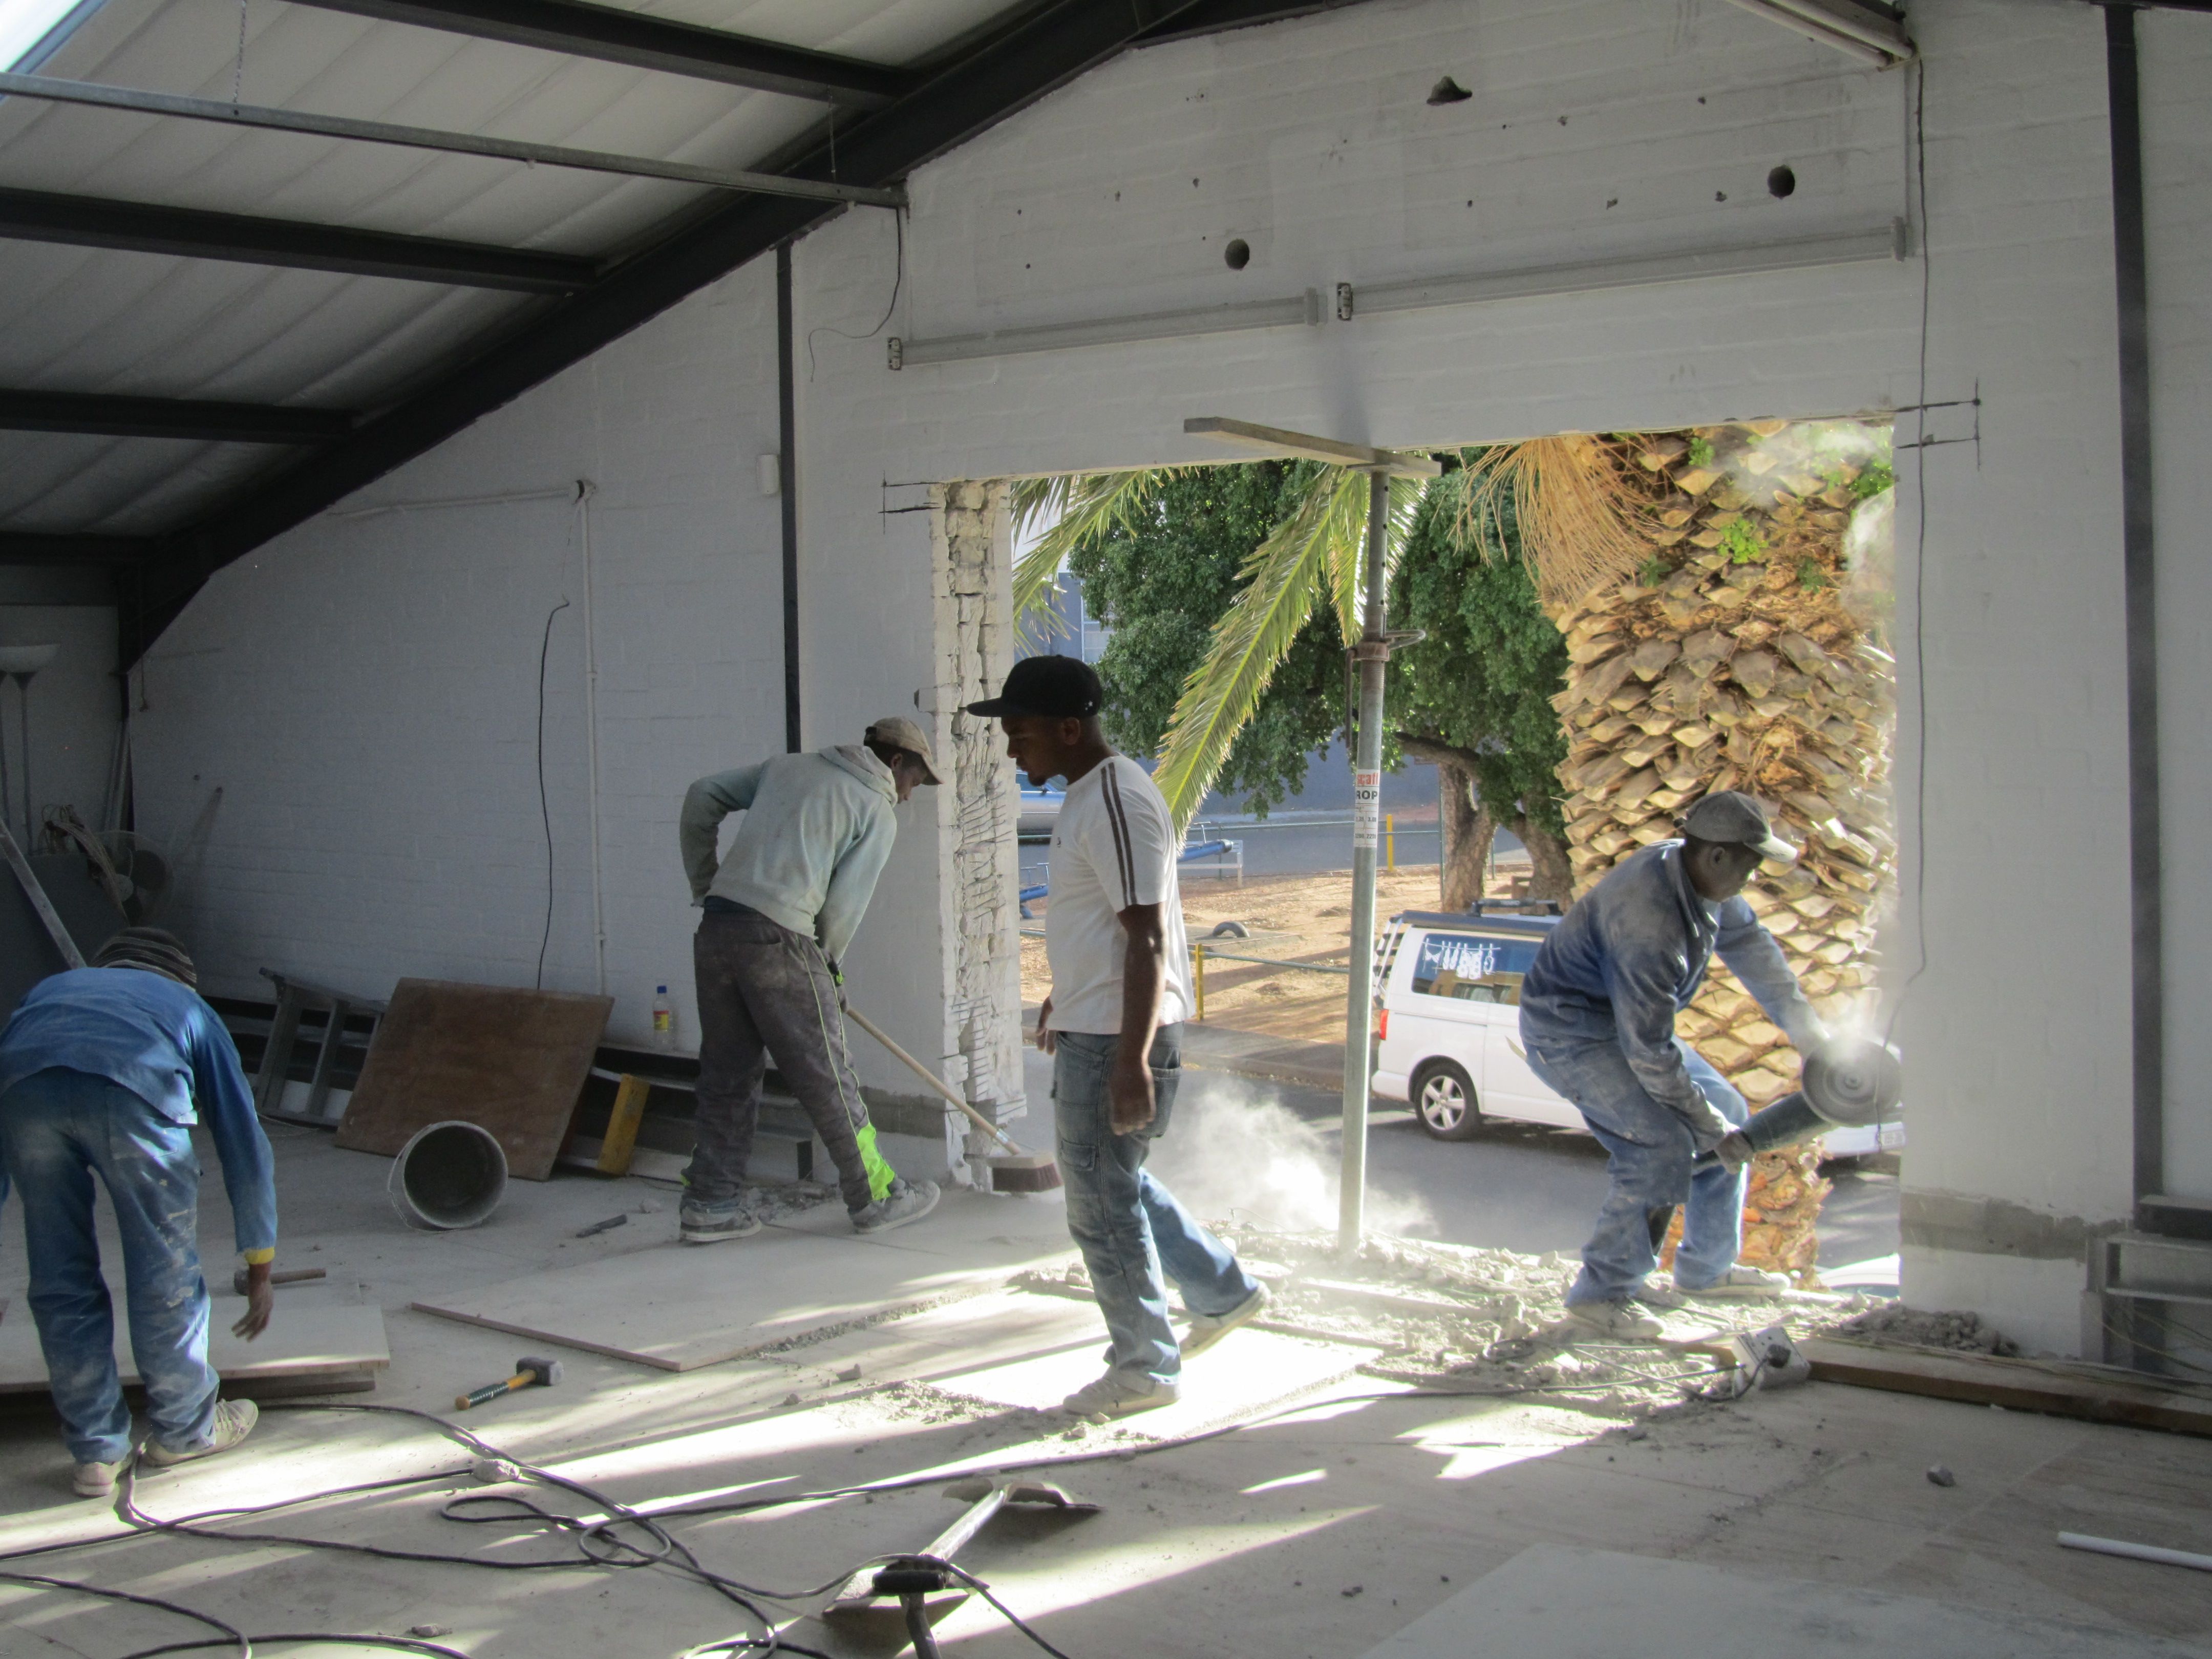 Hard at work to put stacker doors in the tasting room